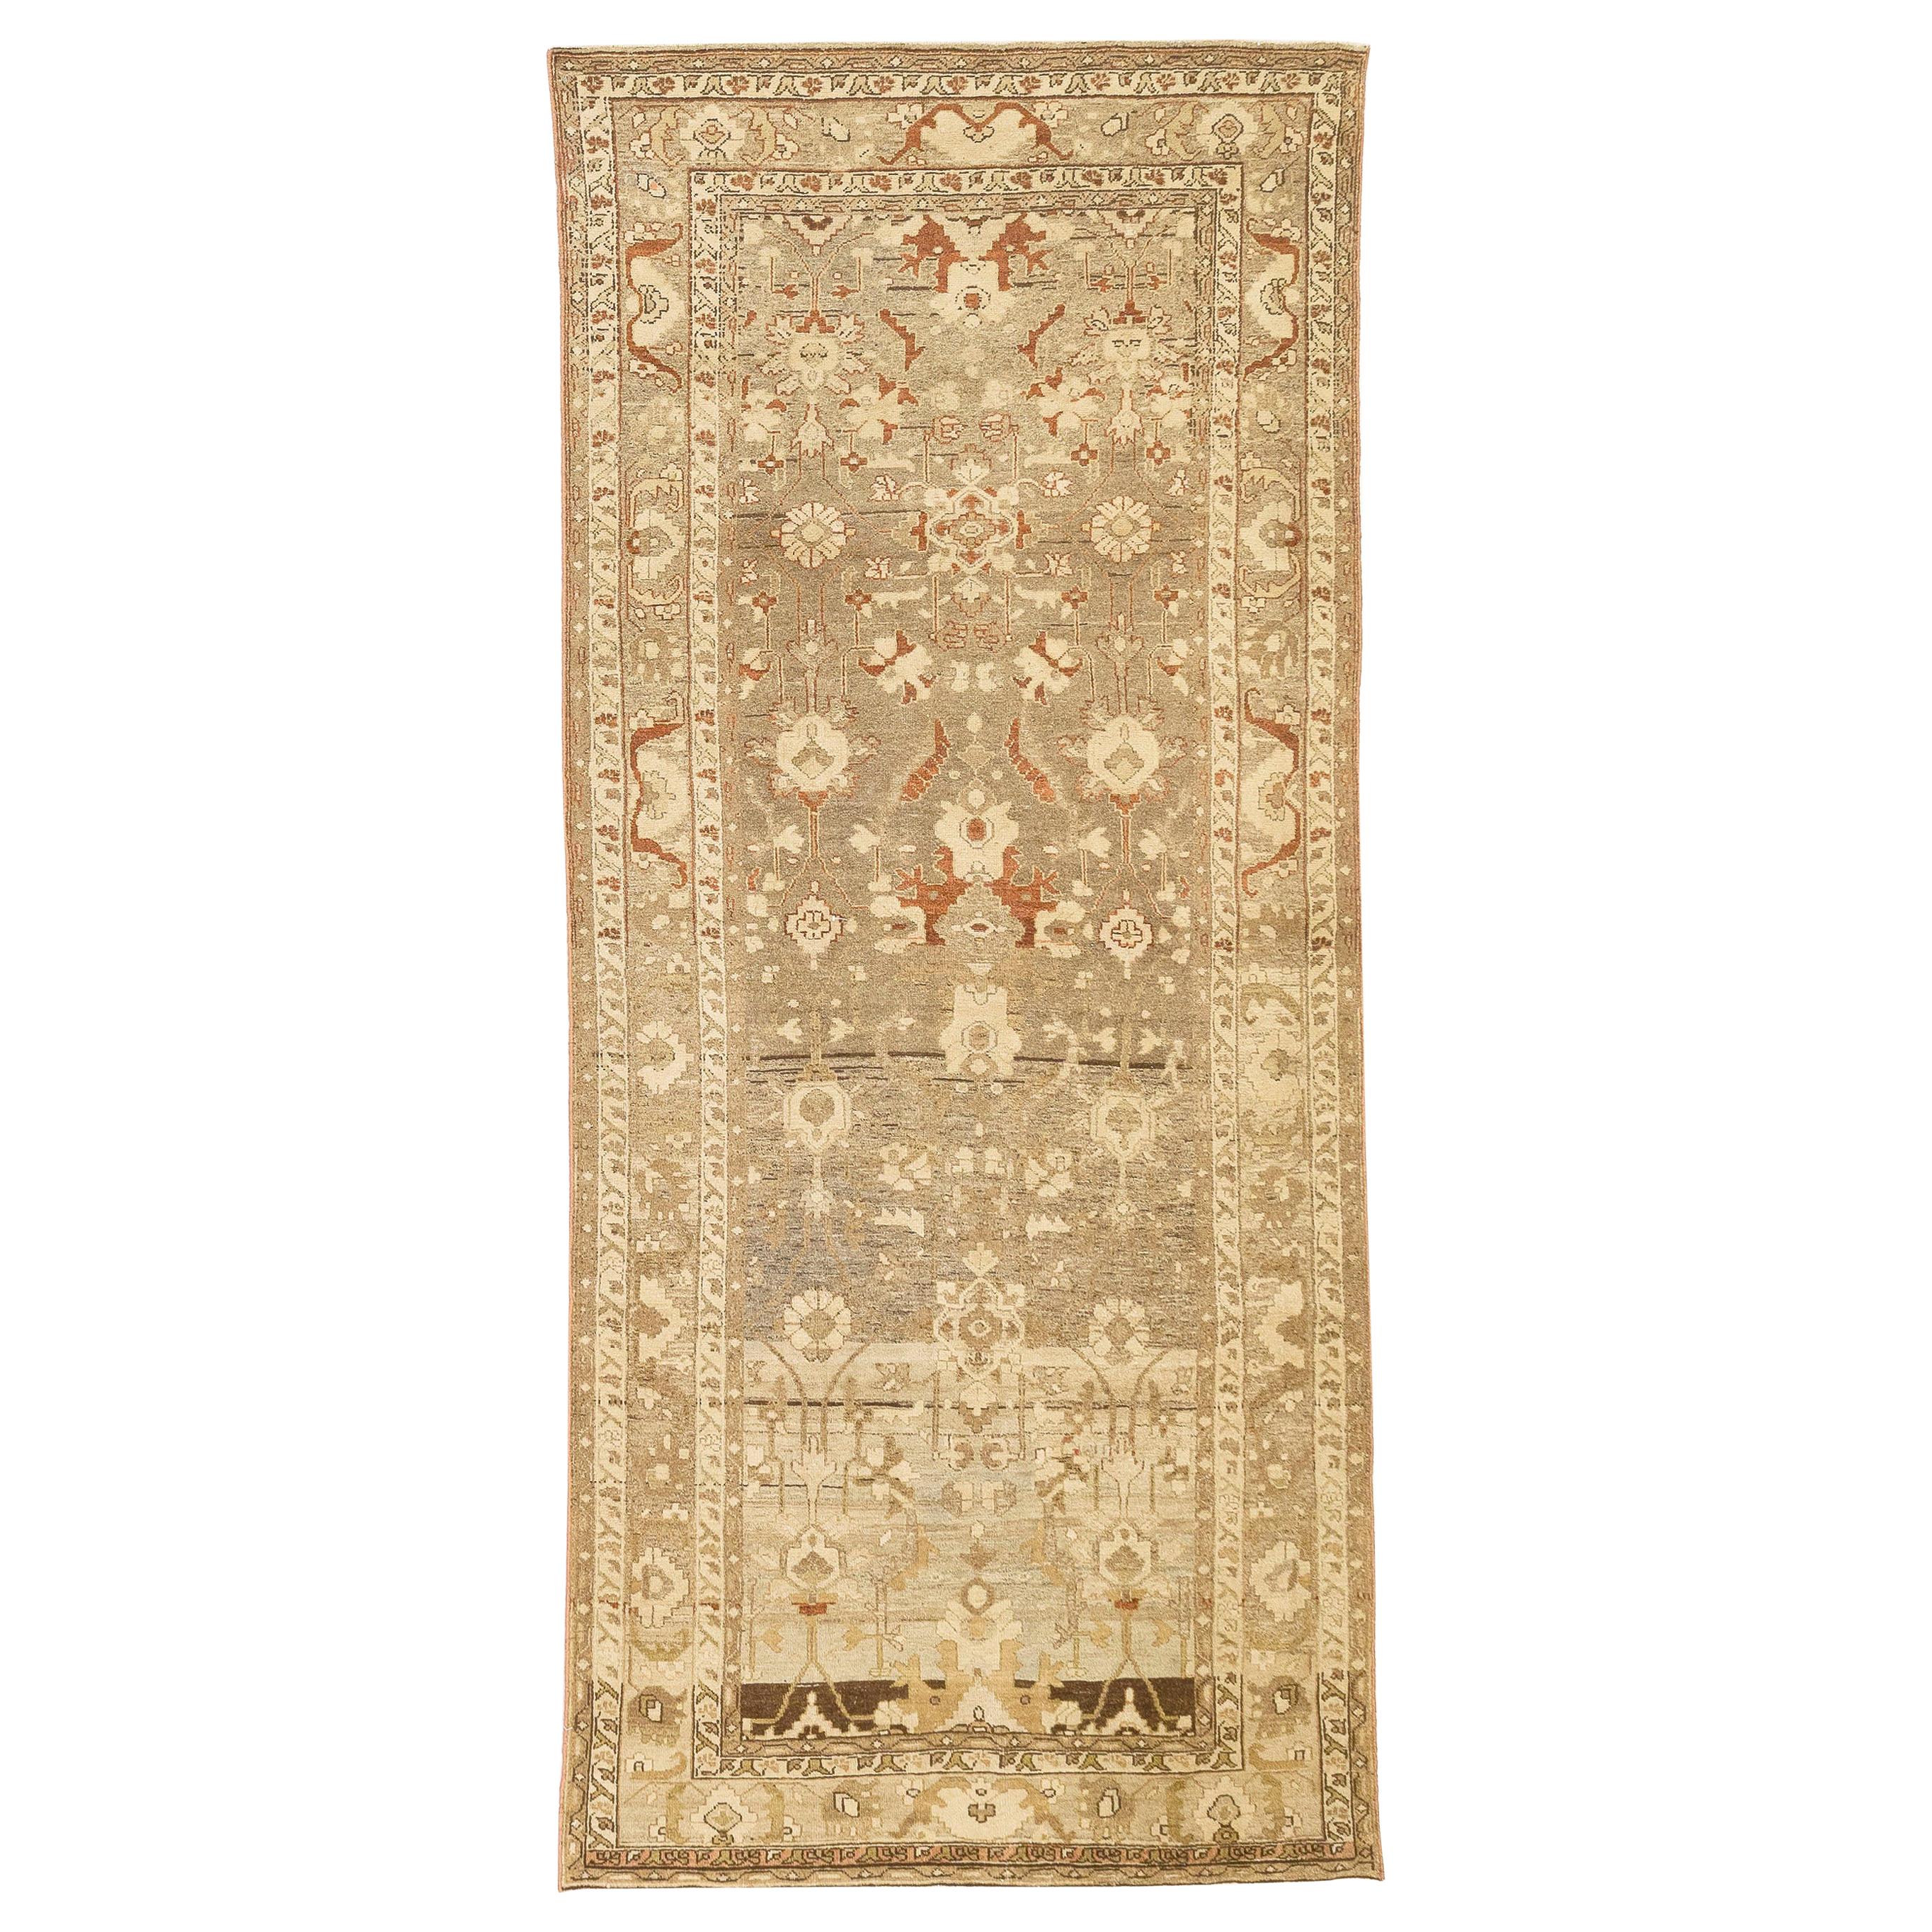 Antique Persian Shahsavan Rug with Brown and Ivory Floral Patterns